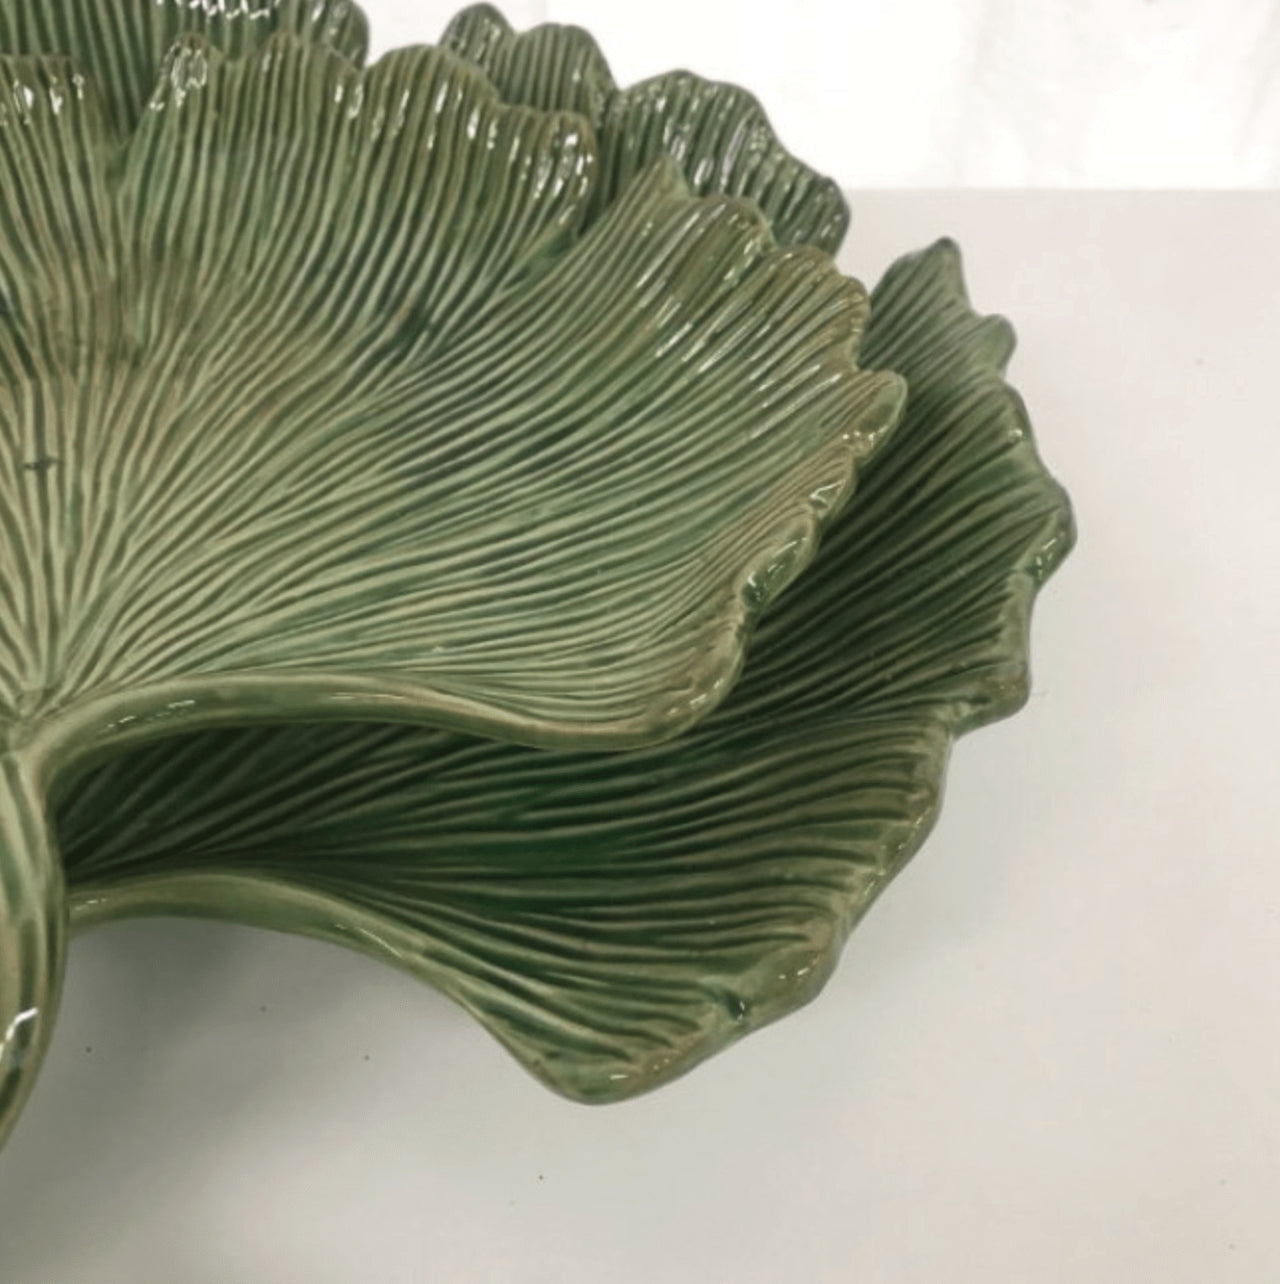 Ginkgo Leaf Plate - Large House of Dudley